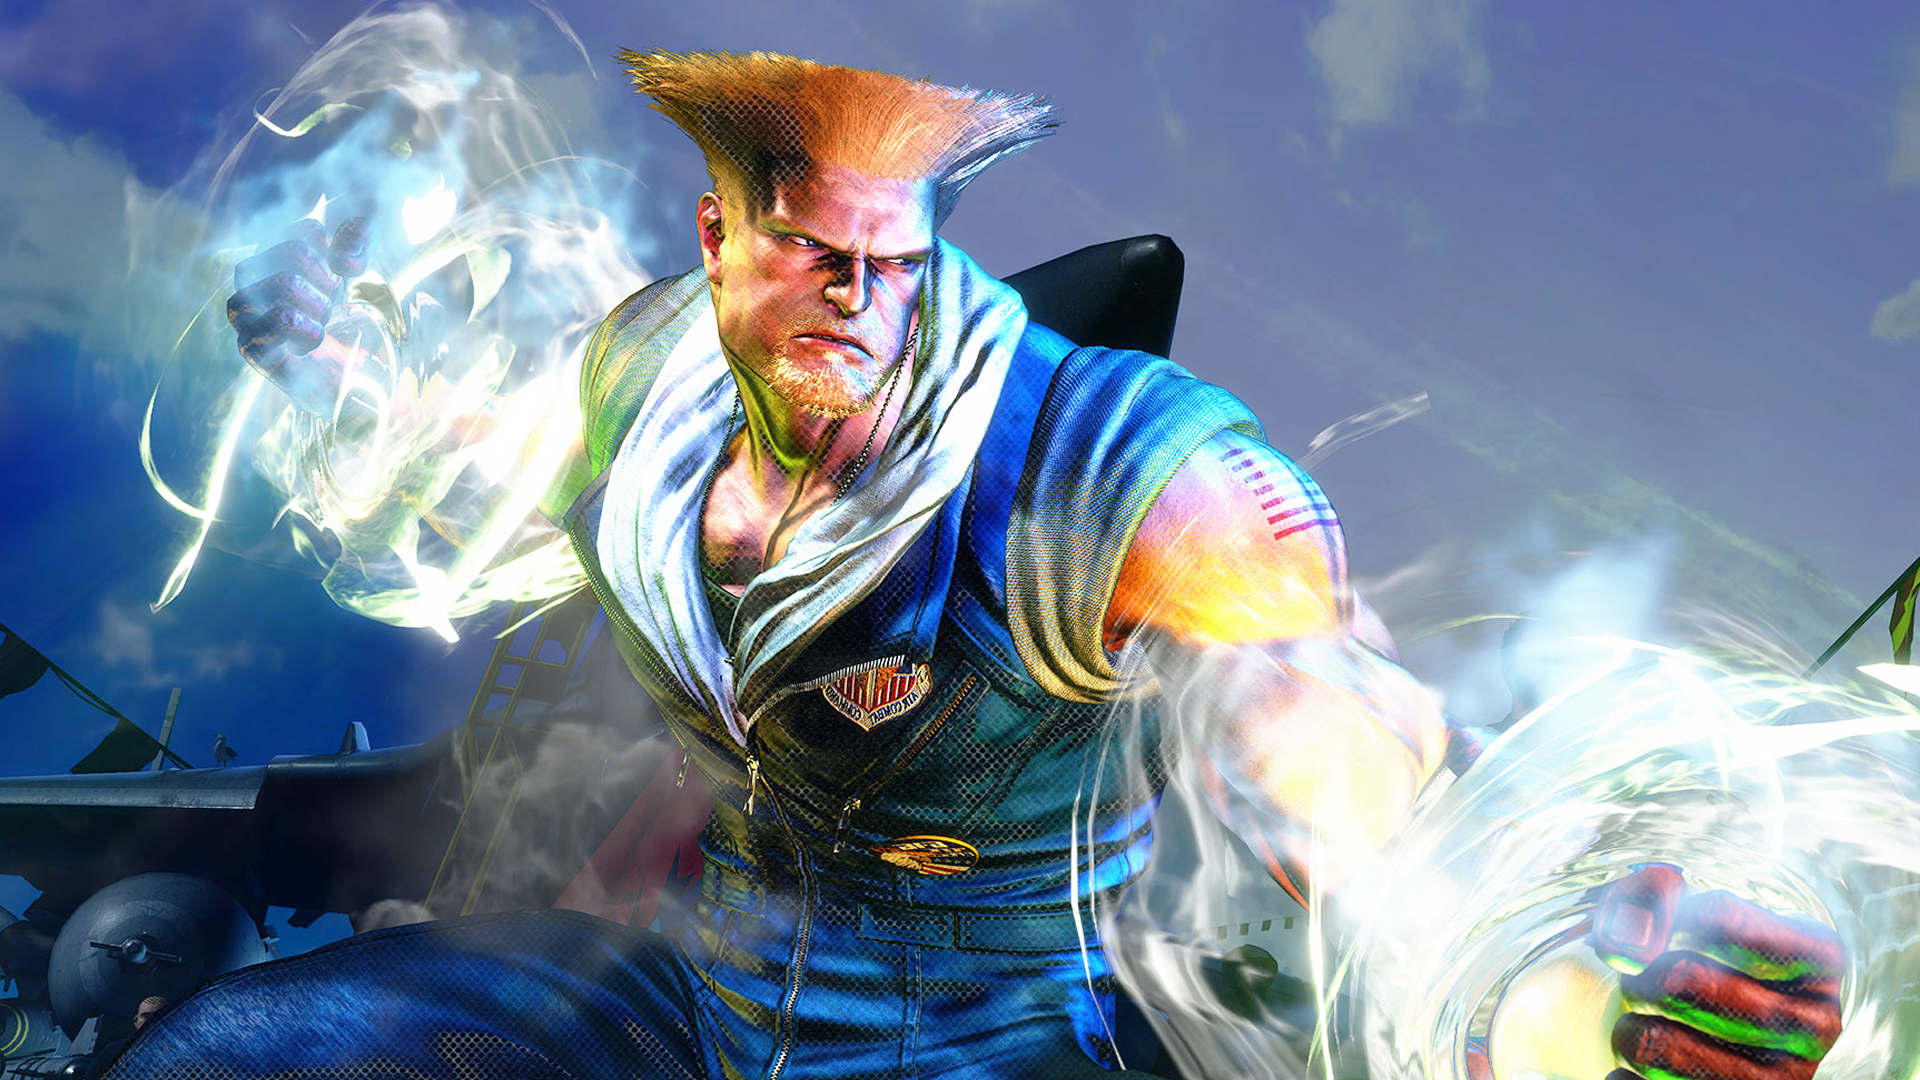 Street Fighter 6 Guile guide